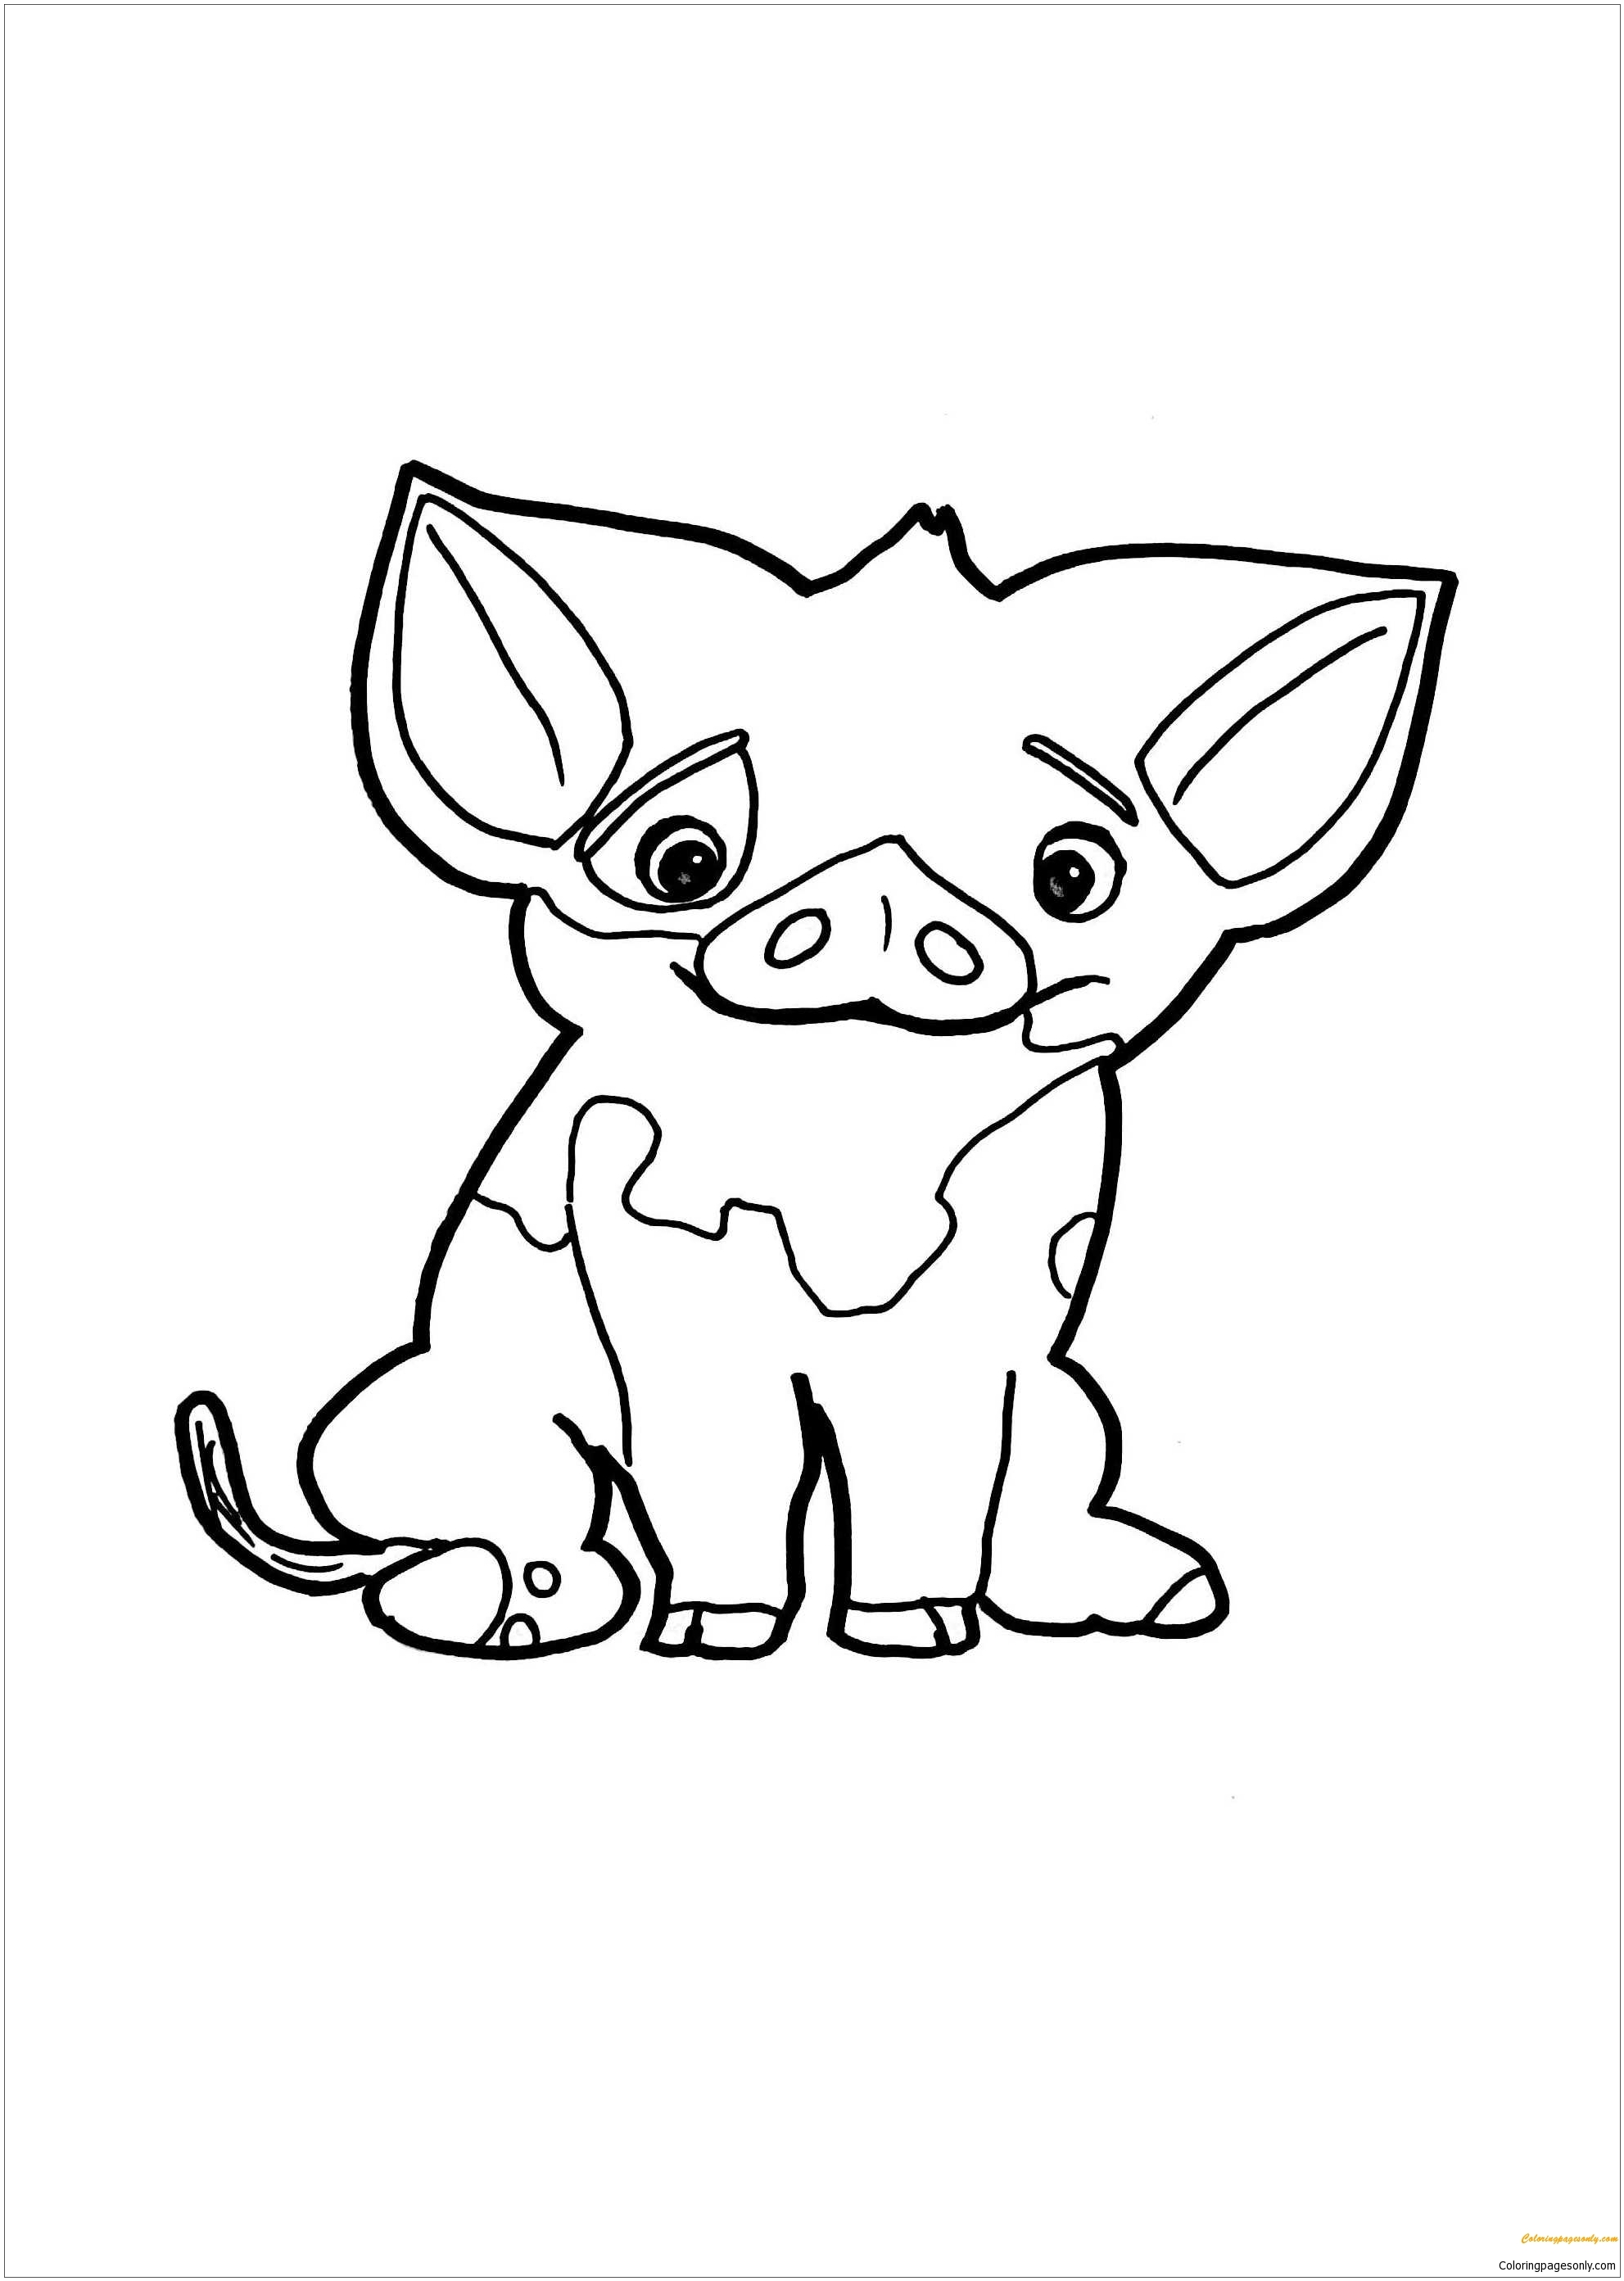 Pua Pig From Moana 6 Coloring Pages ...coloringpagesonly.com